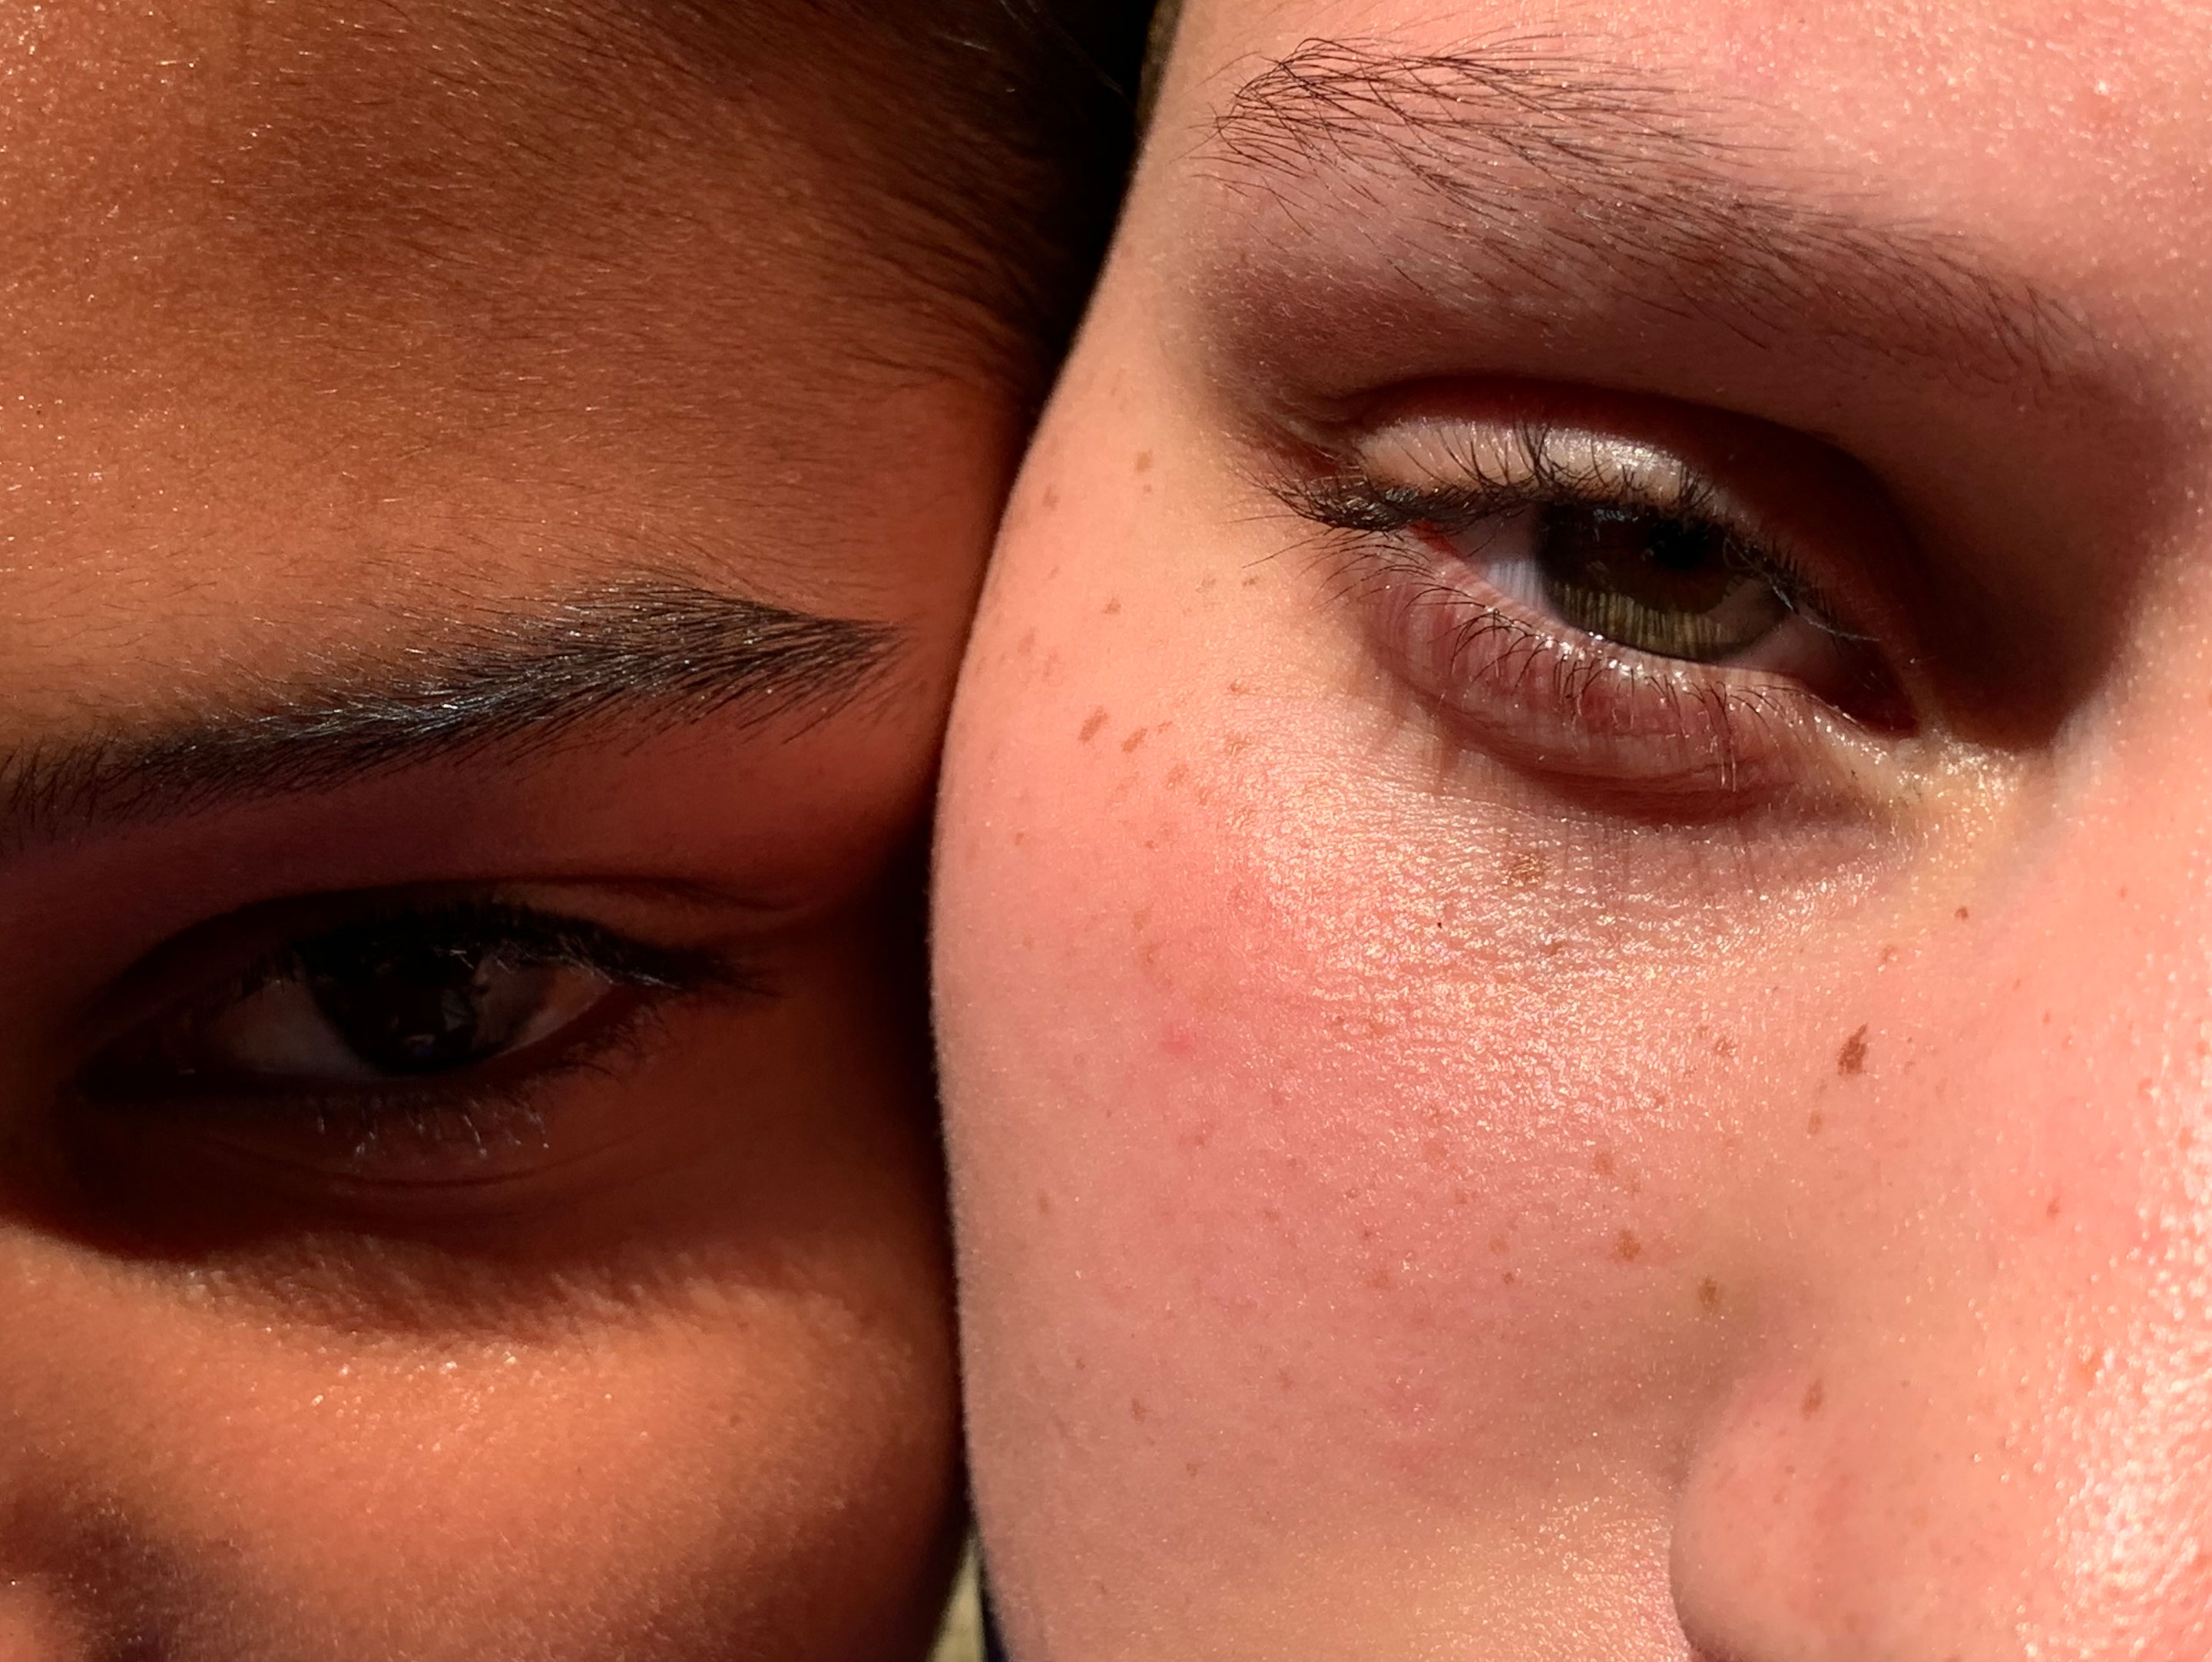 Close-up HDR picture of two women having different skin tones